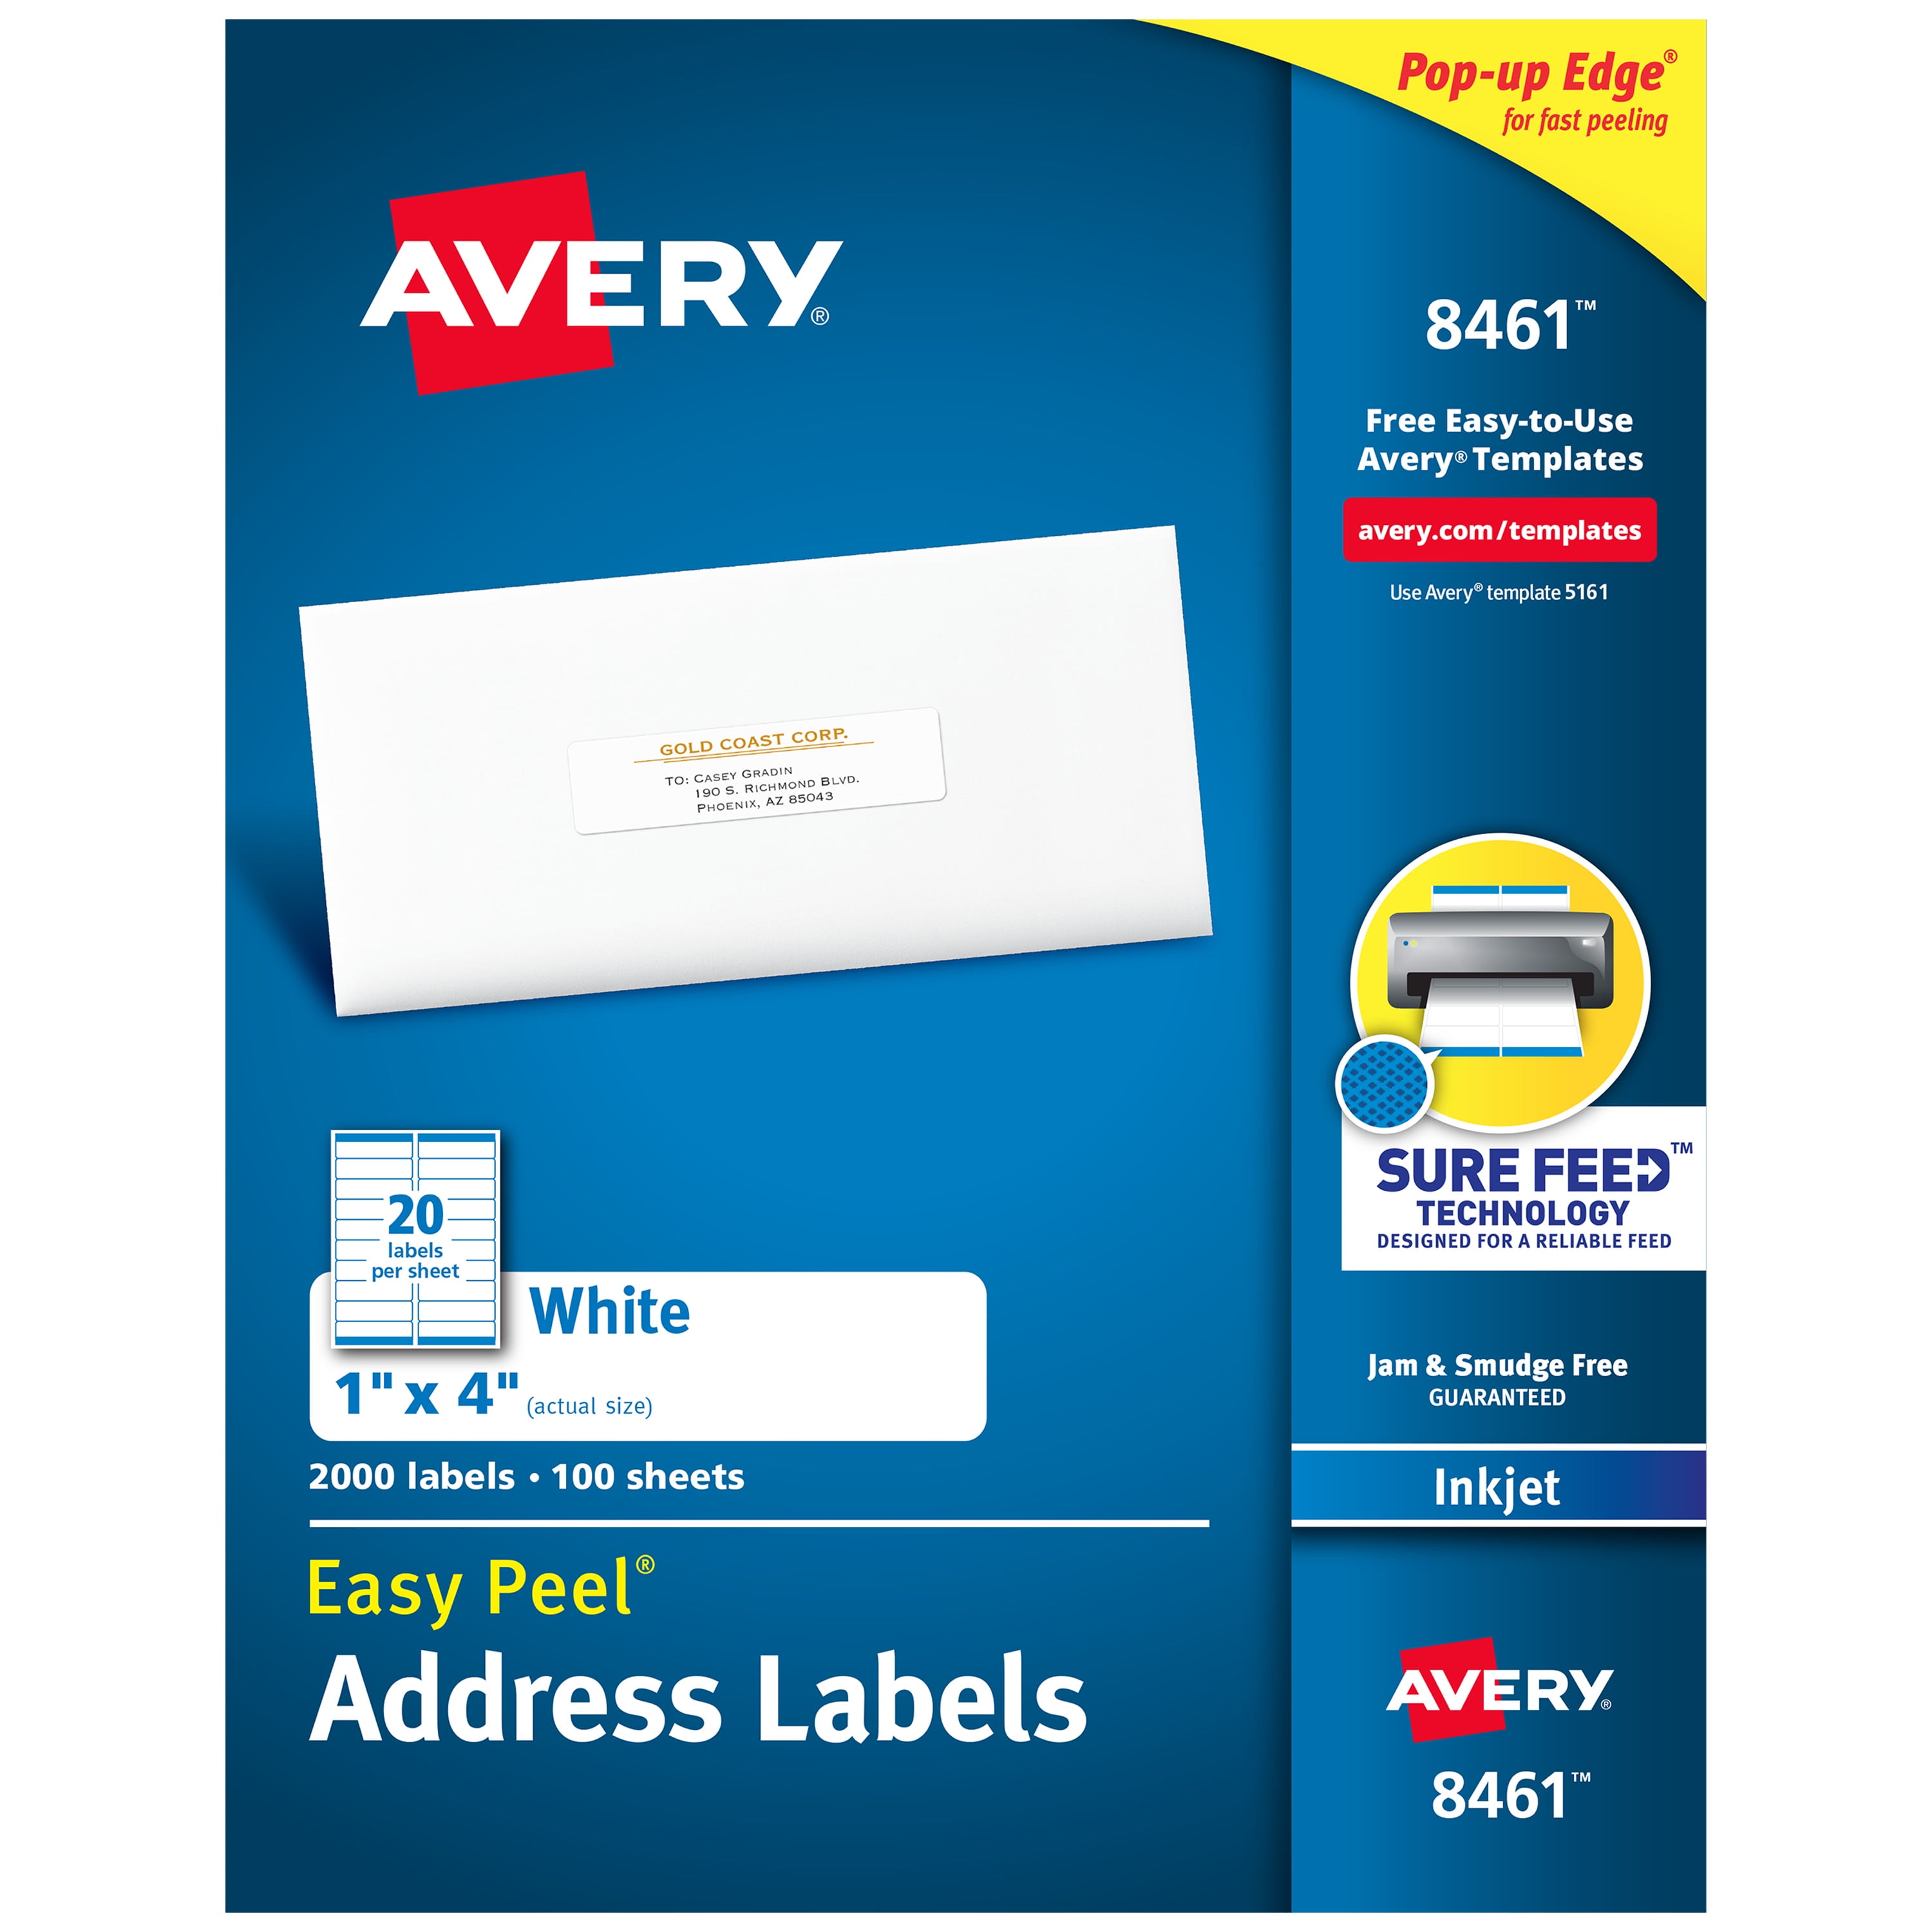 100 Sheets Vertically Slit on Back for Smooth Peel Permanent Adhesive Full Page Shipping Labels Matte White 8.5 x 11 Label